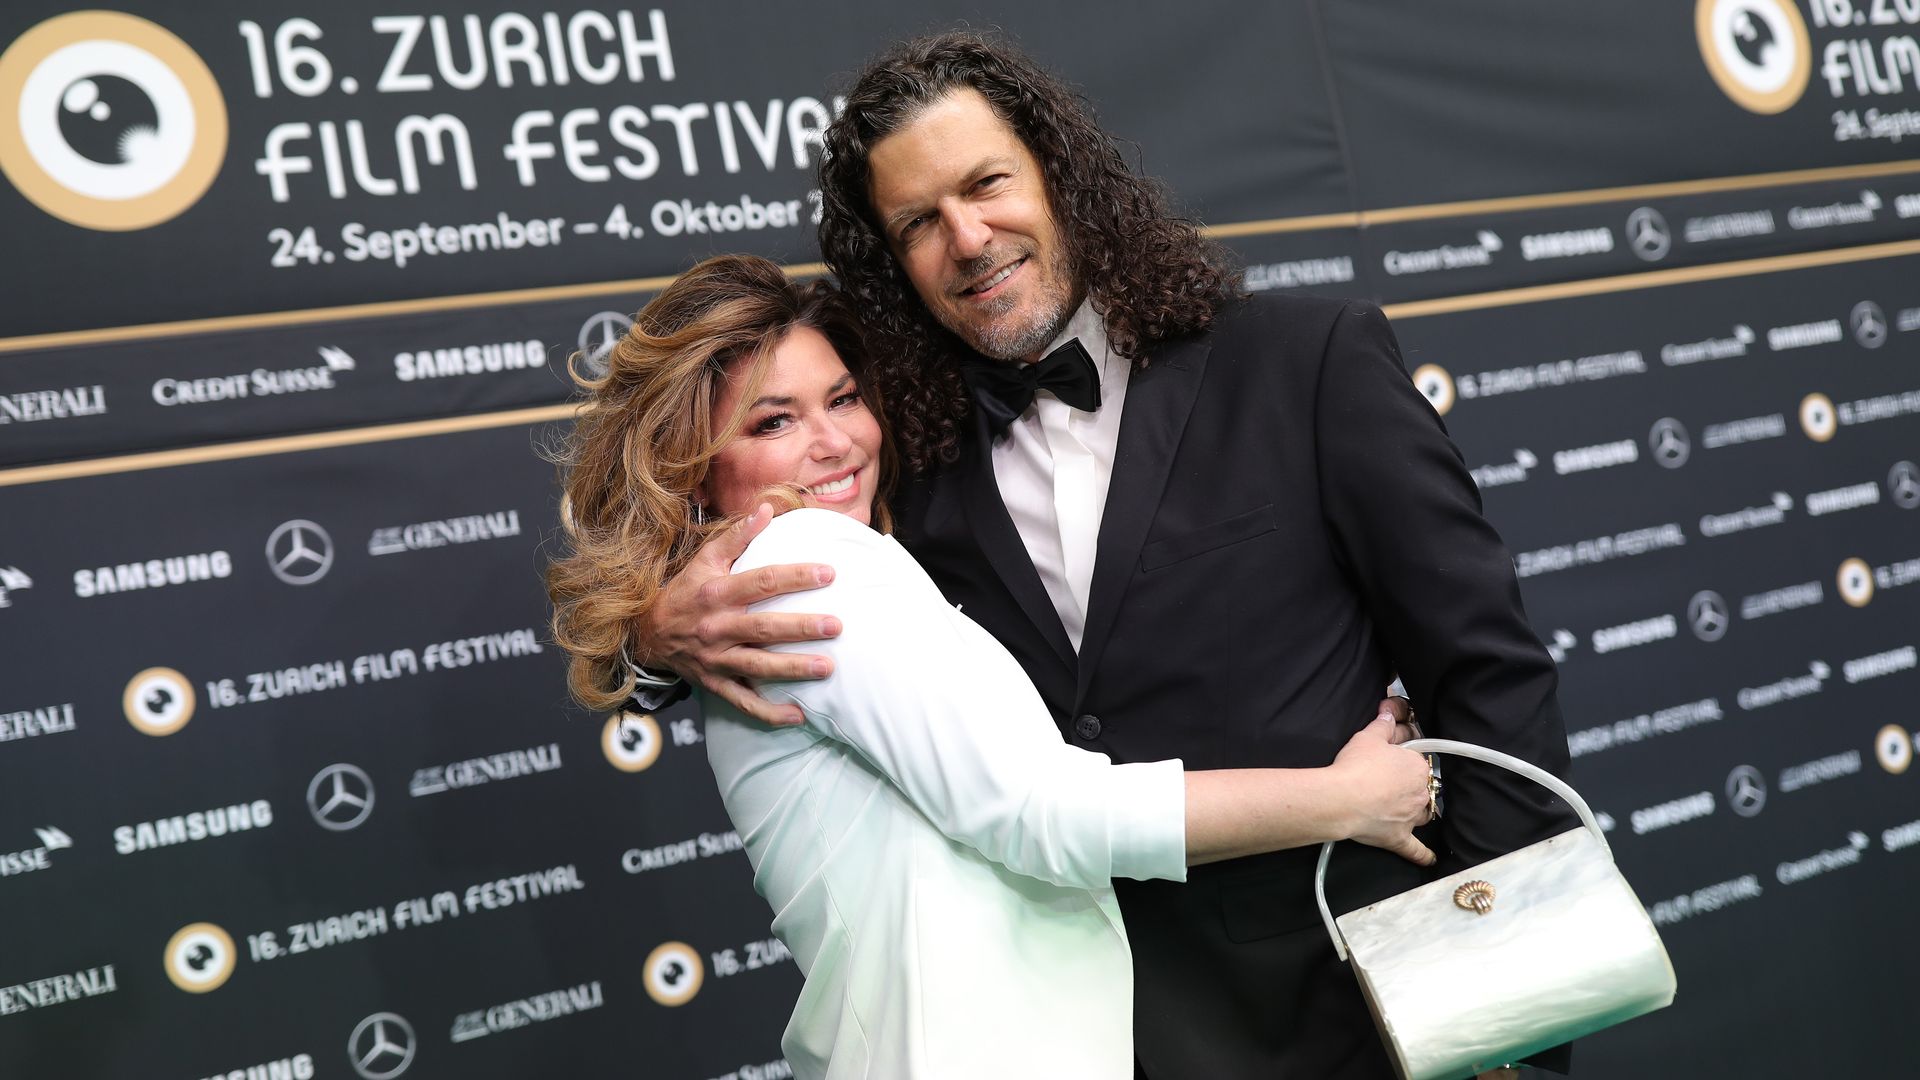 ZURICH, SWITZERLAND - SEPTEMBER 26:  Shania Twain and her husband Frederic Thiebaud attend the "Who you gonna call" photocall during the 16th Zurich Film Festival at Kino Corso on September 26, 2020 in Zurich, Switzerland. (Photo by Andreas Rentz/Getty Images for ZFF)